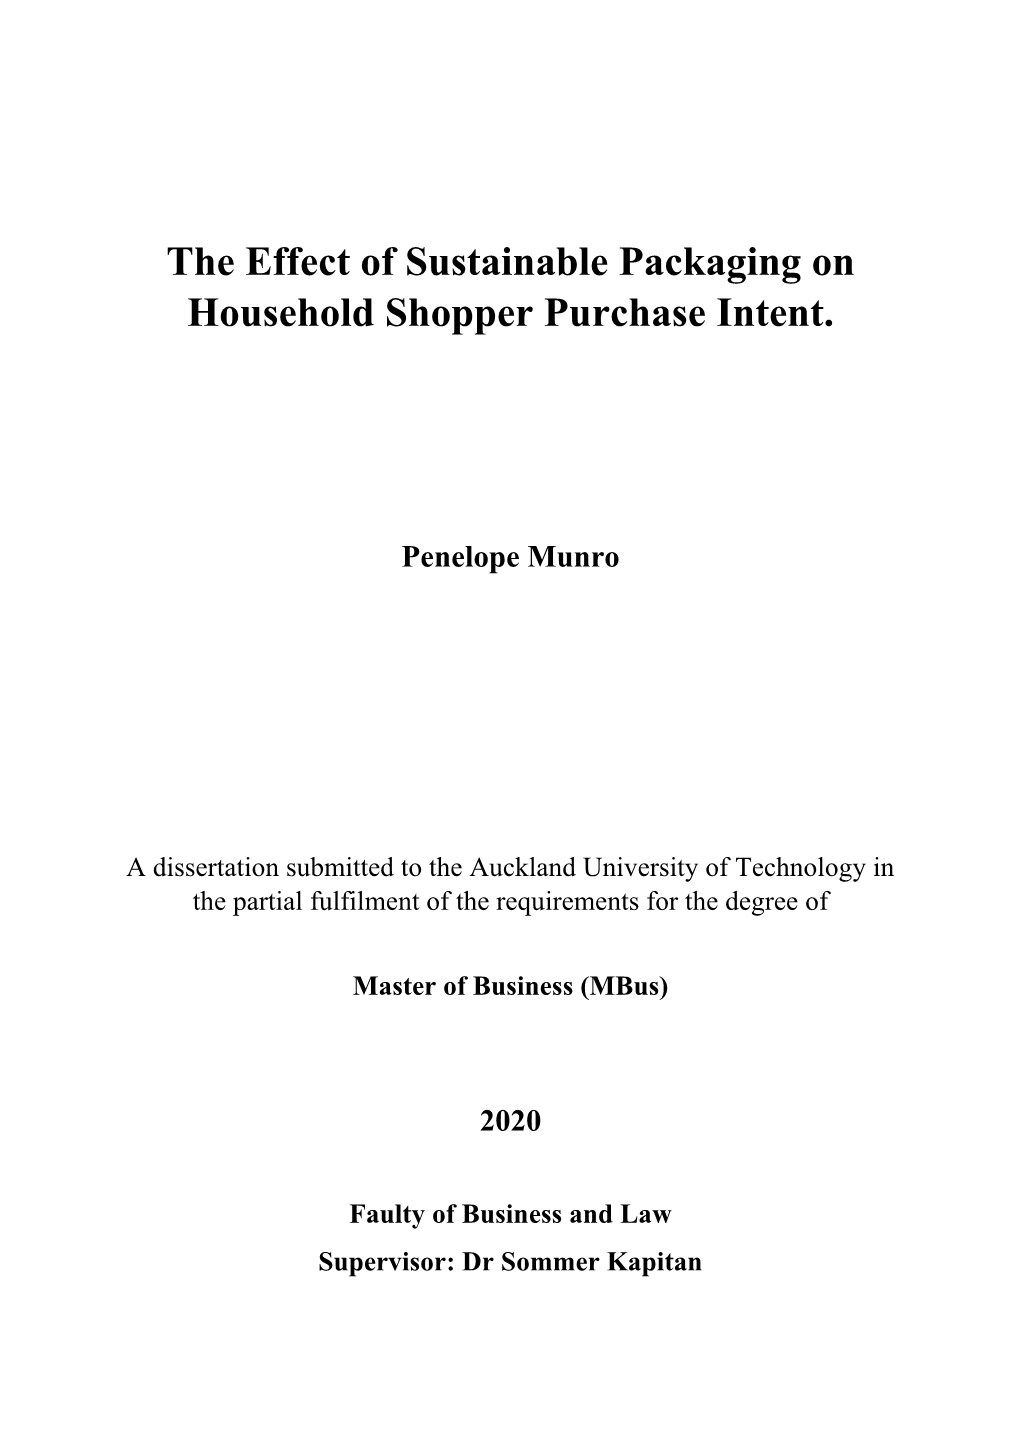 The Effect of Sustainable Packaging on Household Shopper Purchase Intent